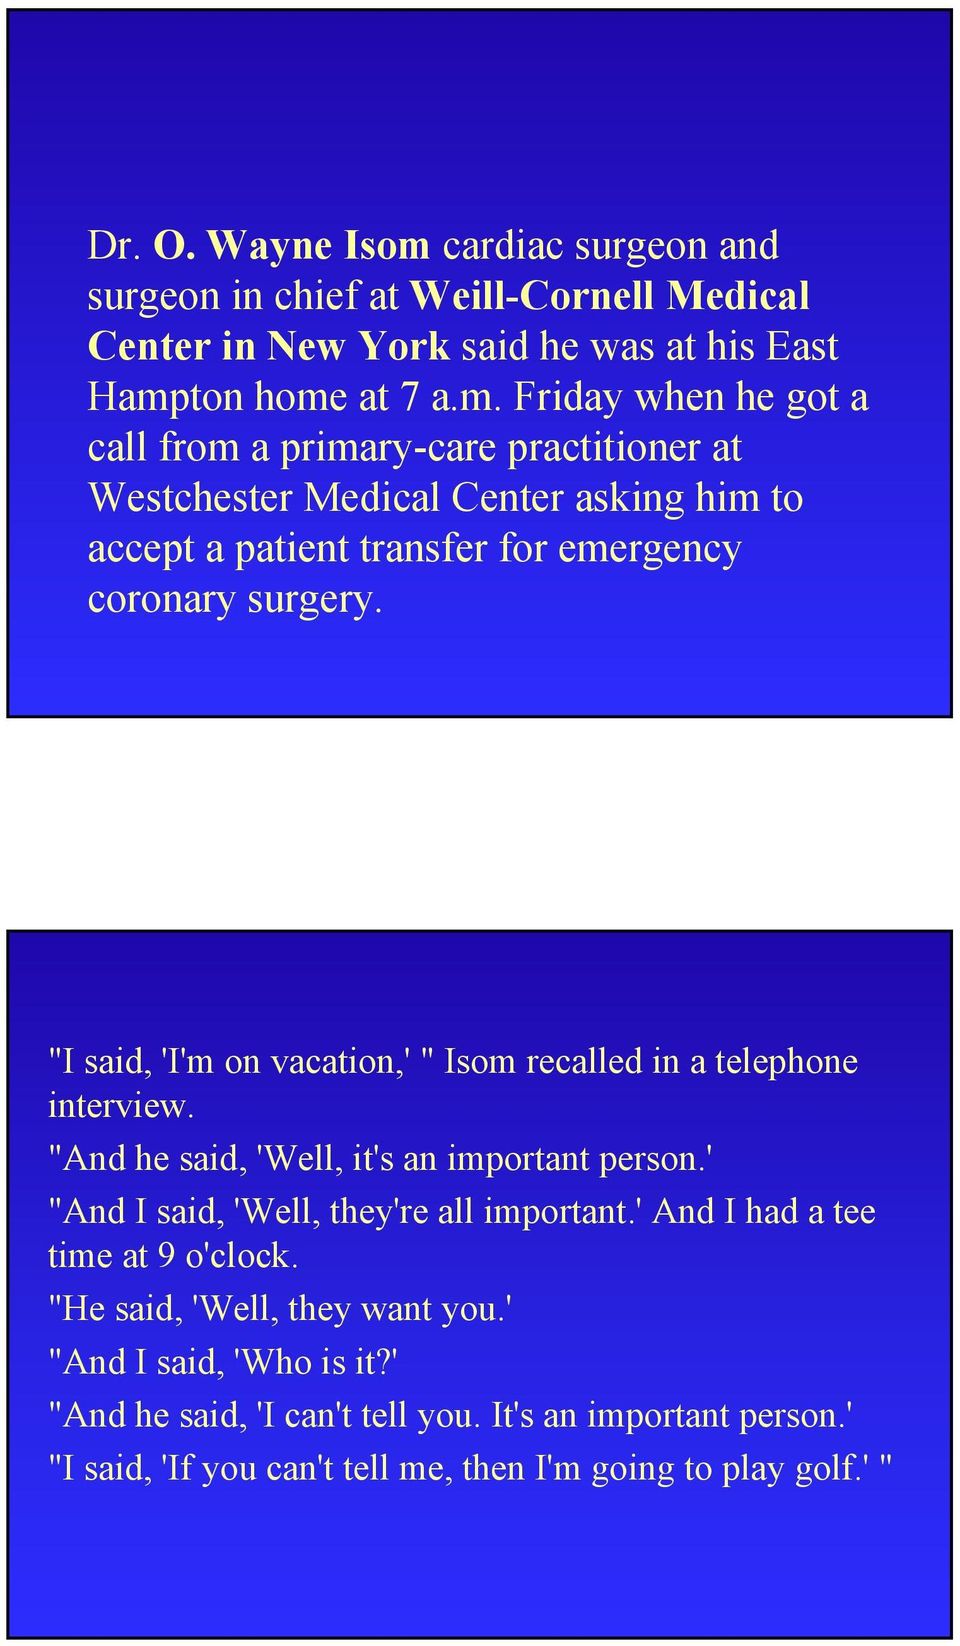 ton home at 7 a.m. Friday when he got a call from a primary-care practitioner at Westchester Medical Center asking him to accept a patient transfer for emergency coronary surgery.